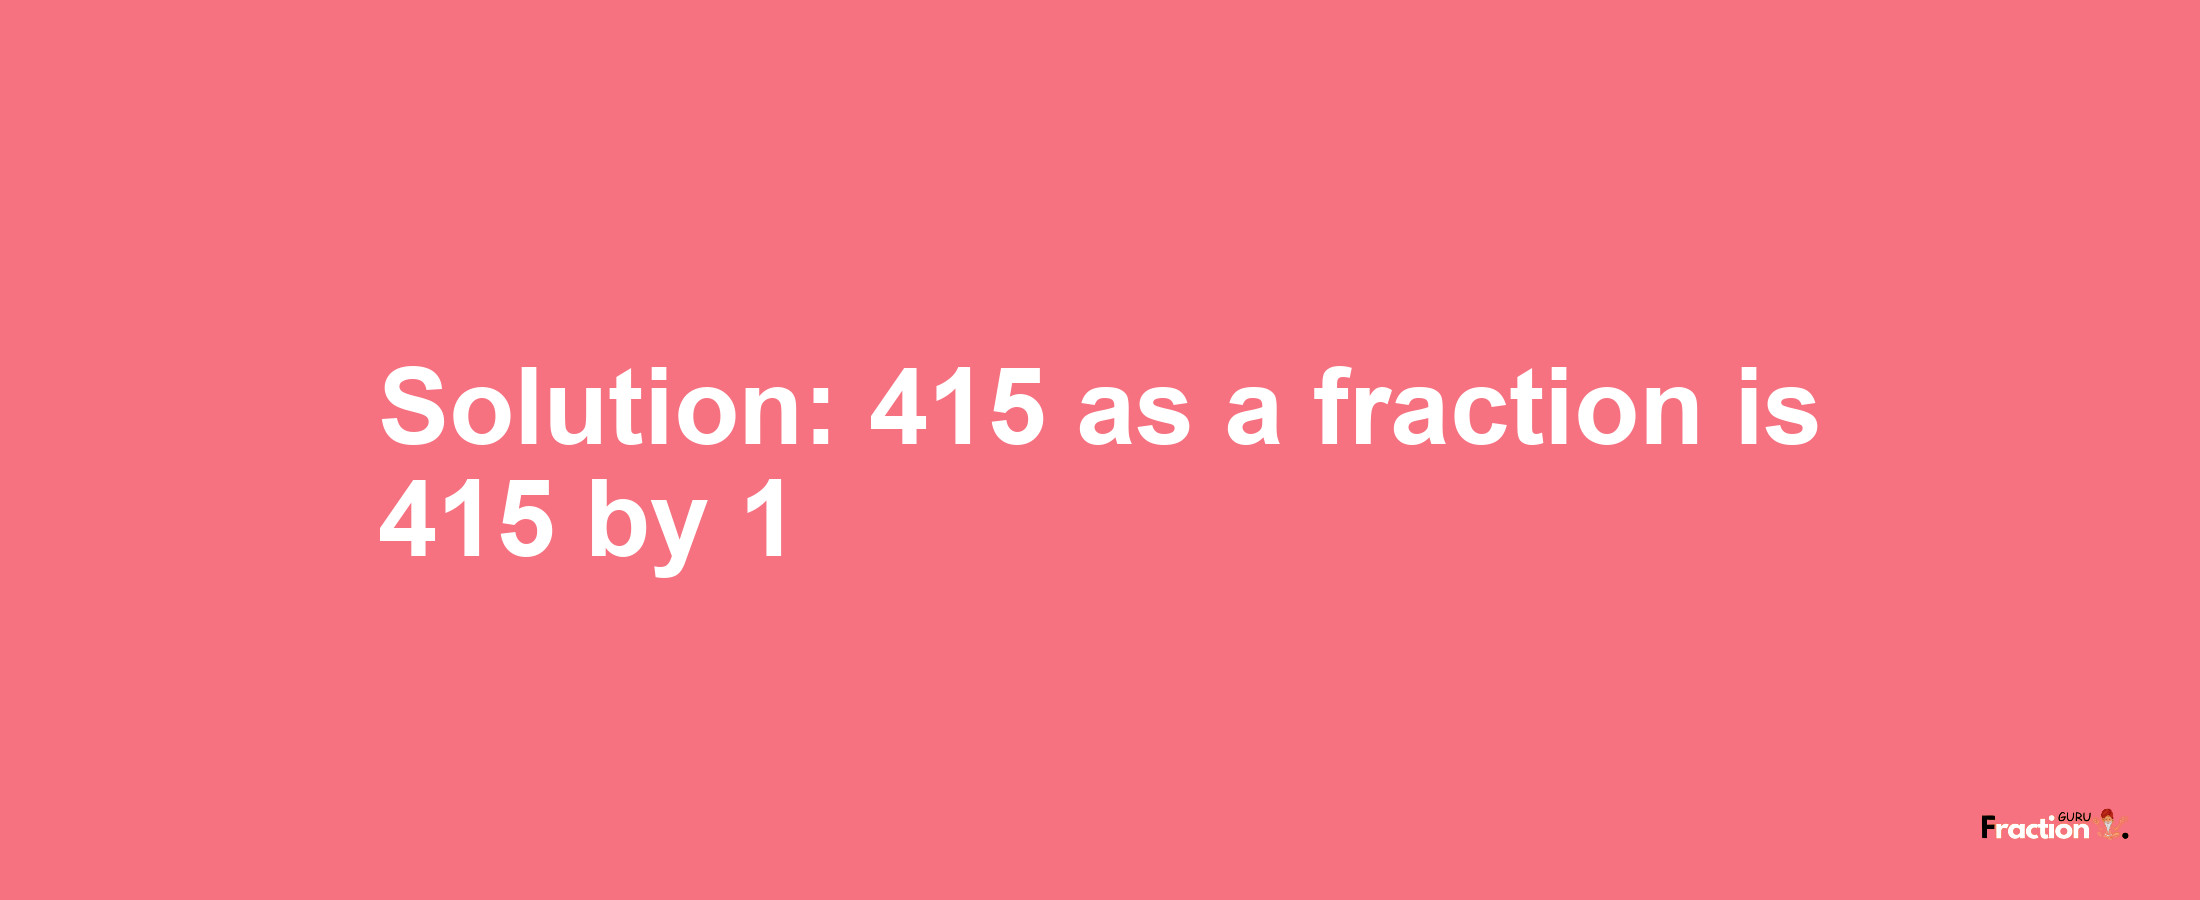 Solution:415 as a fraction is 415/1